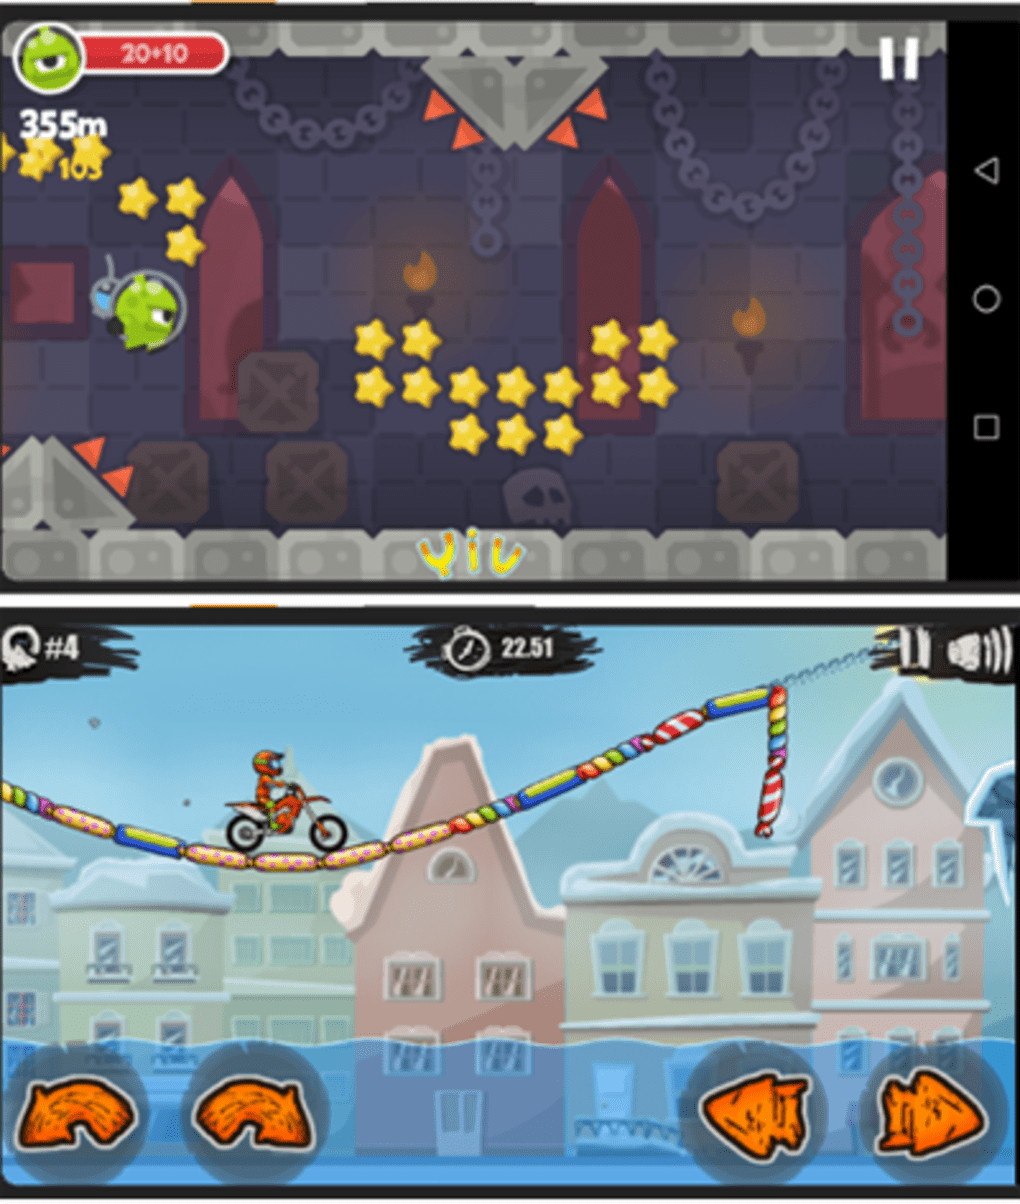 50 in 1 Free games Apk Download for Android- Latest version 0.2